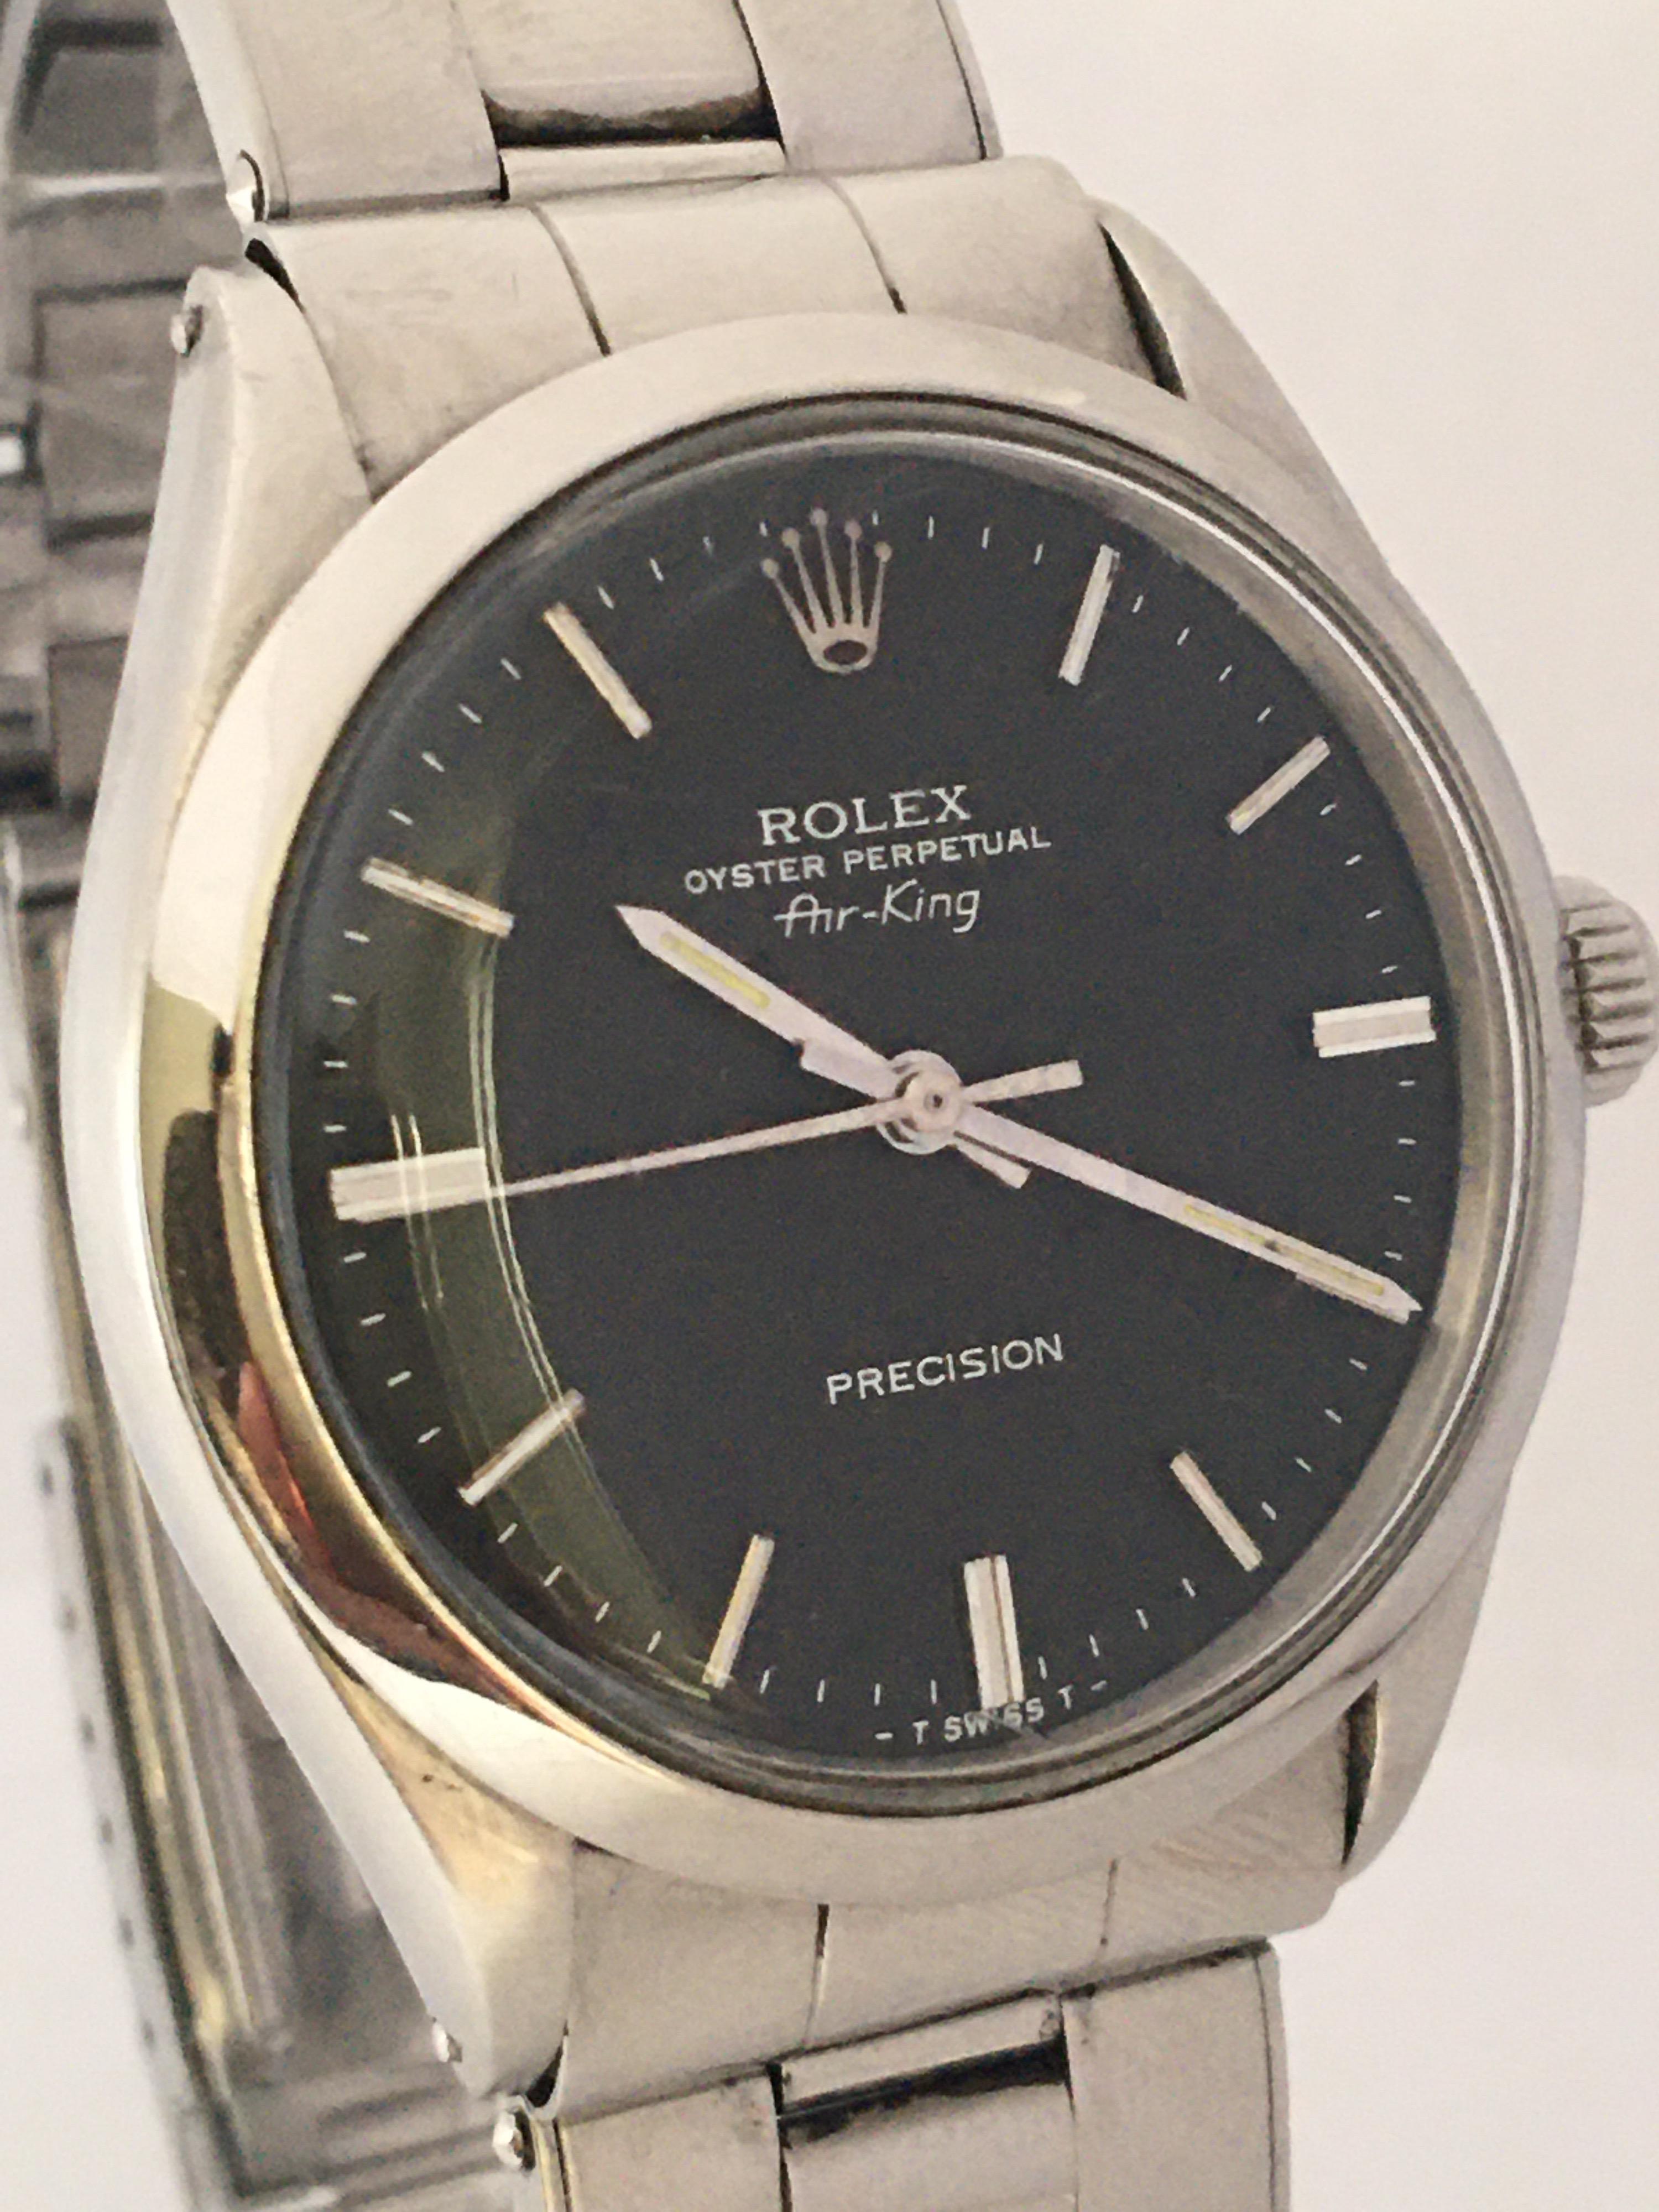 1960s SS Rolex Oyster Perpetual Air-King Precision, 1520 Mechanical Watch For Sale 8